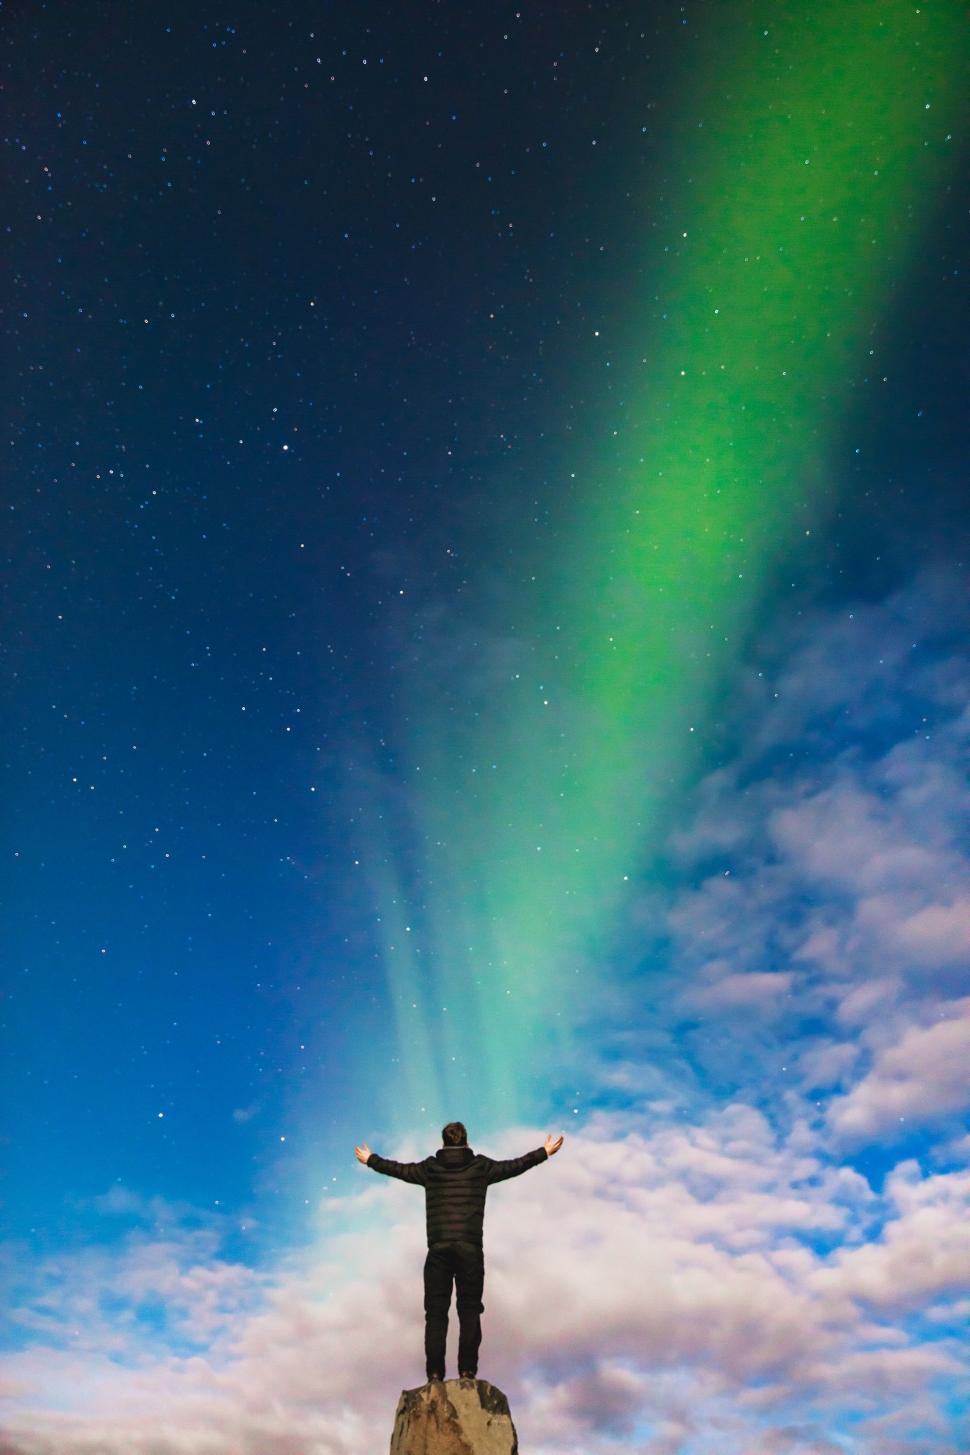 Free Image of Man Standing on Top of Rock Under Green Aurora Bore 